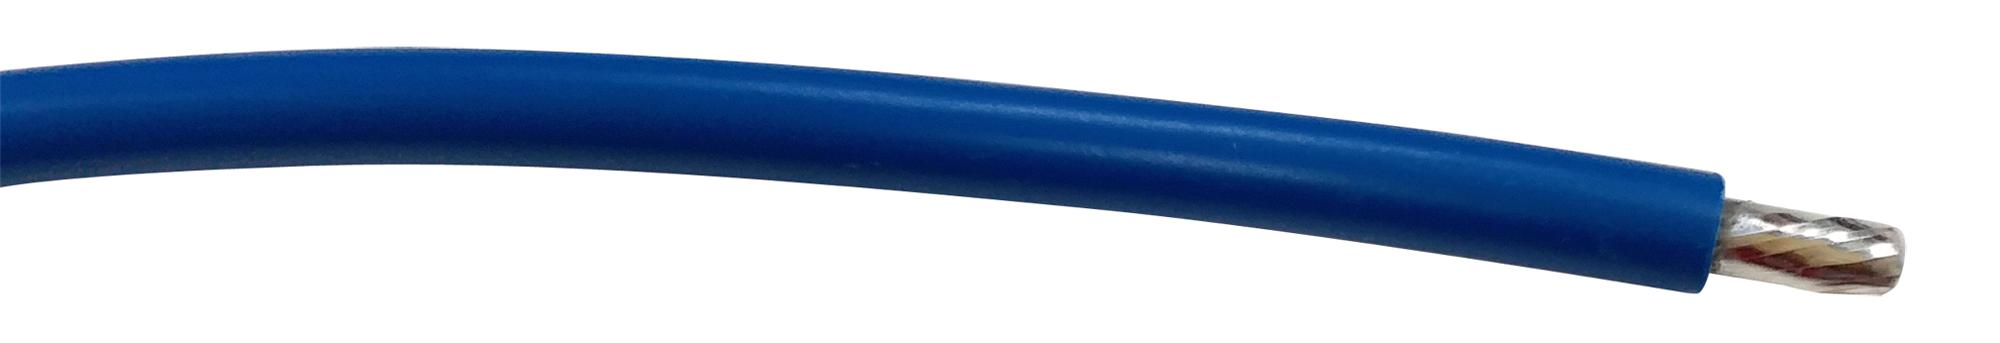 PP002503 CABLE WIRE, 24AWG, BLUE, 305M PRO POWER